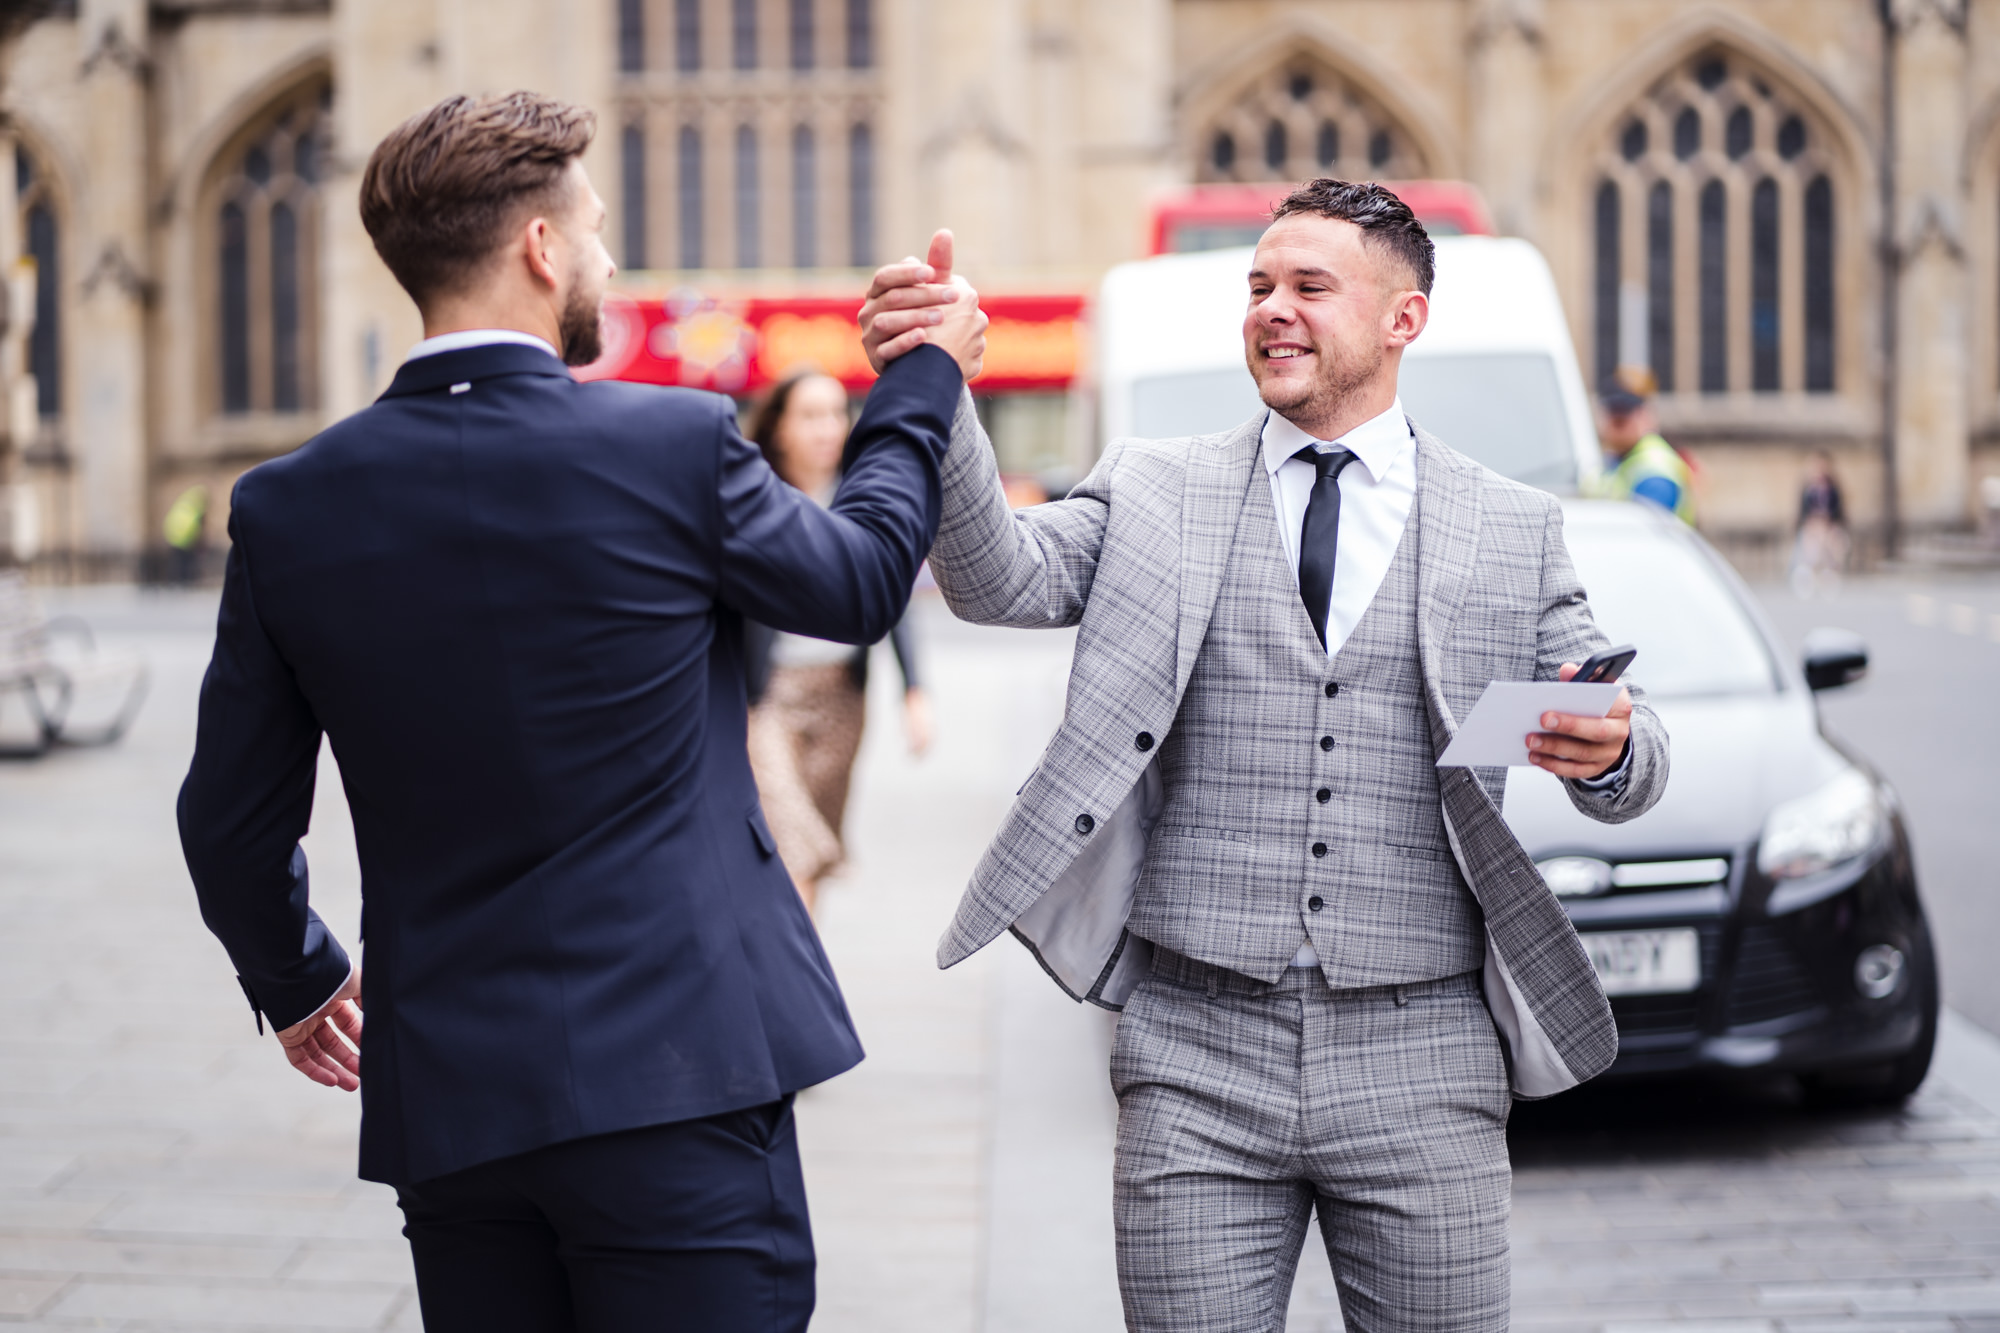 guests high fiving outside Bath Guildhall wedding